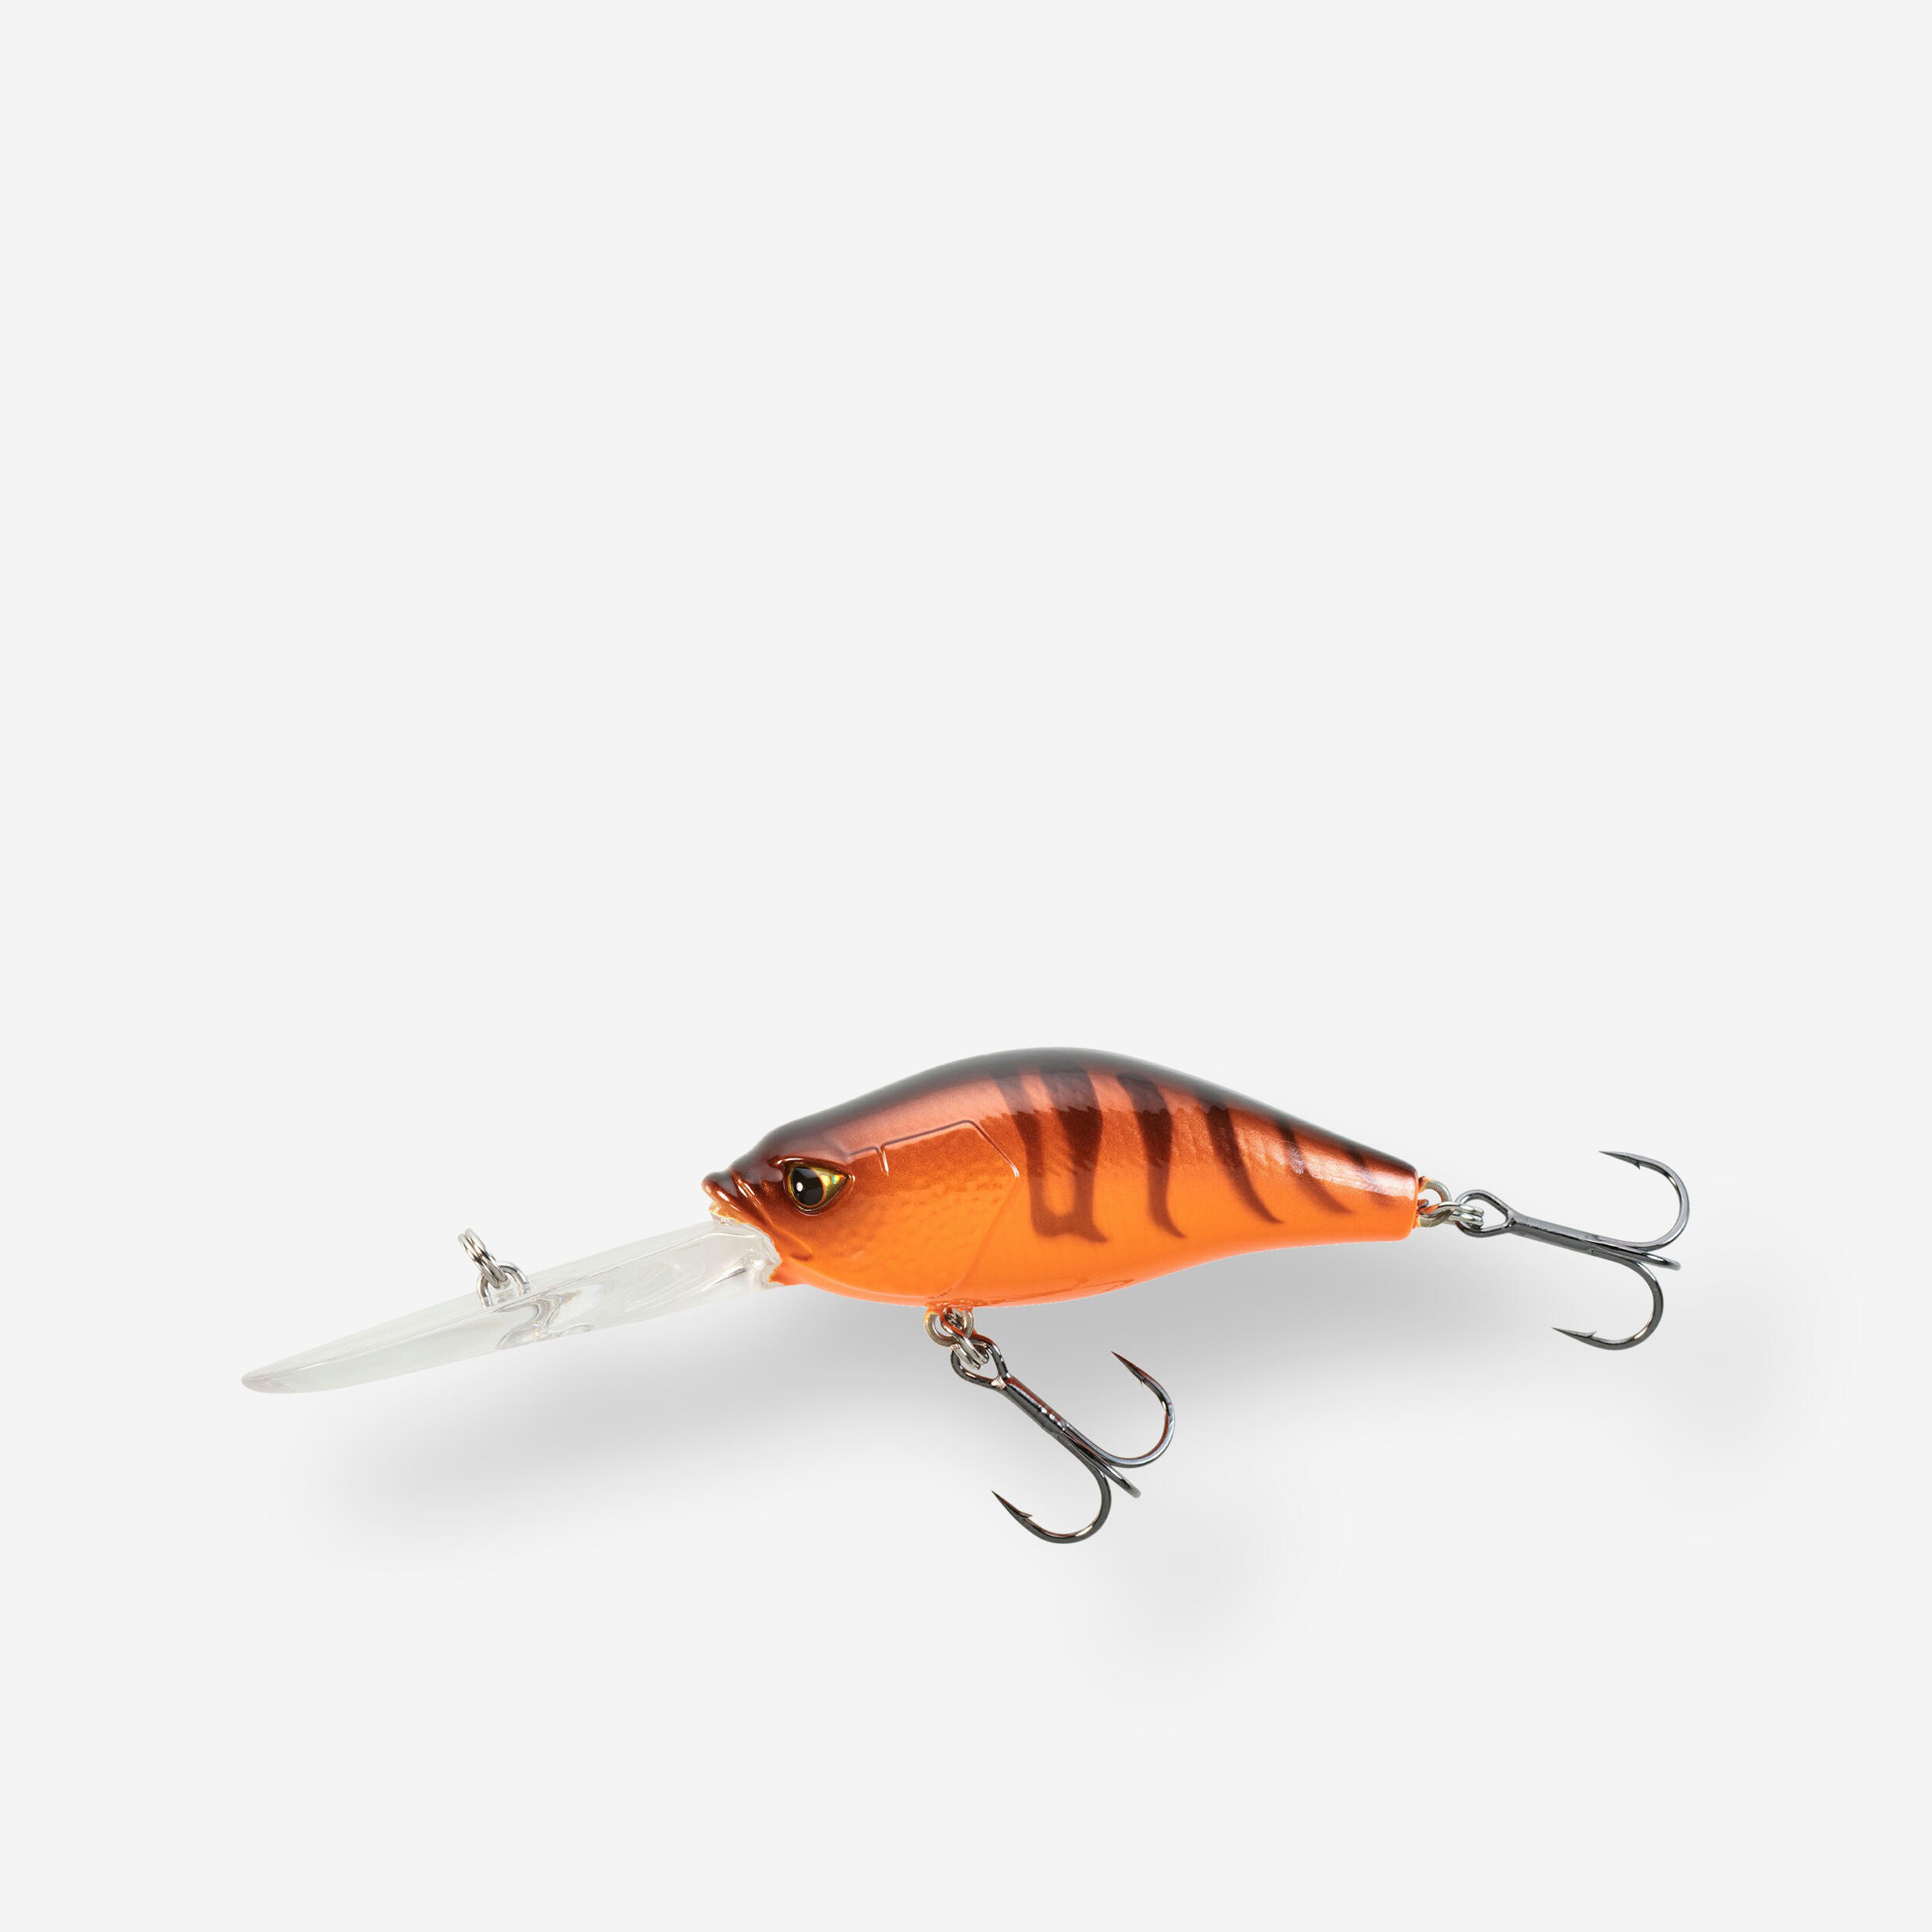 JACKALL i Shad Tail Paddle Soft Finesse Bait 4.8 6ct BLUEGILL/PEARL WHITE